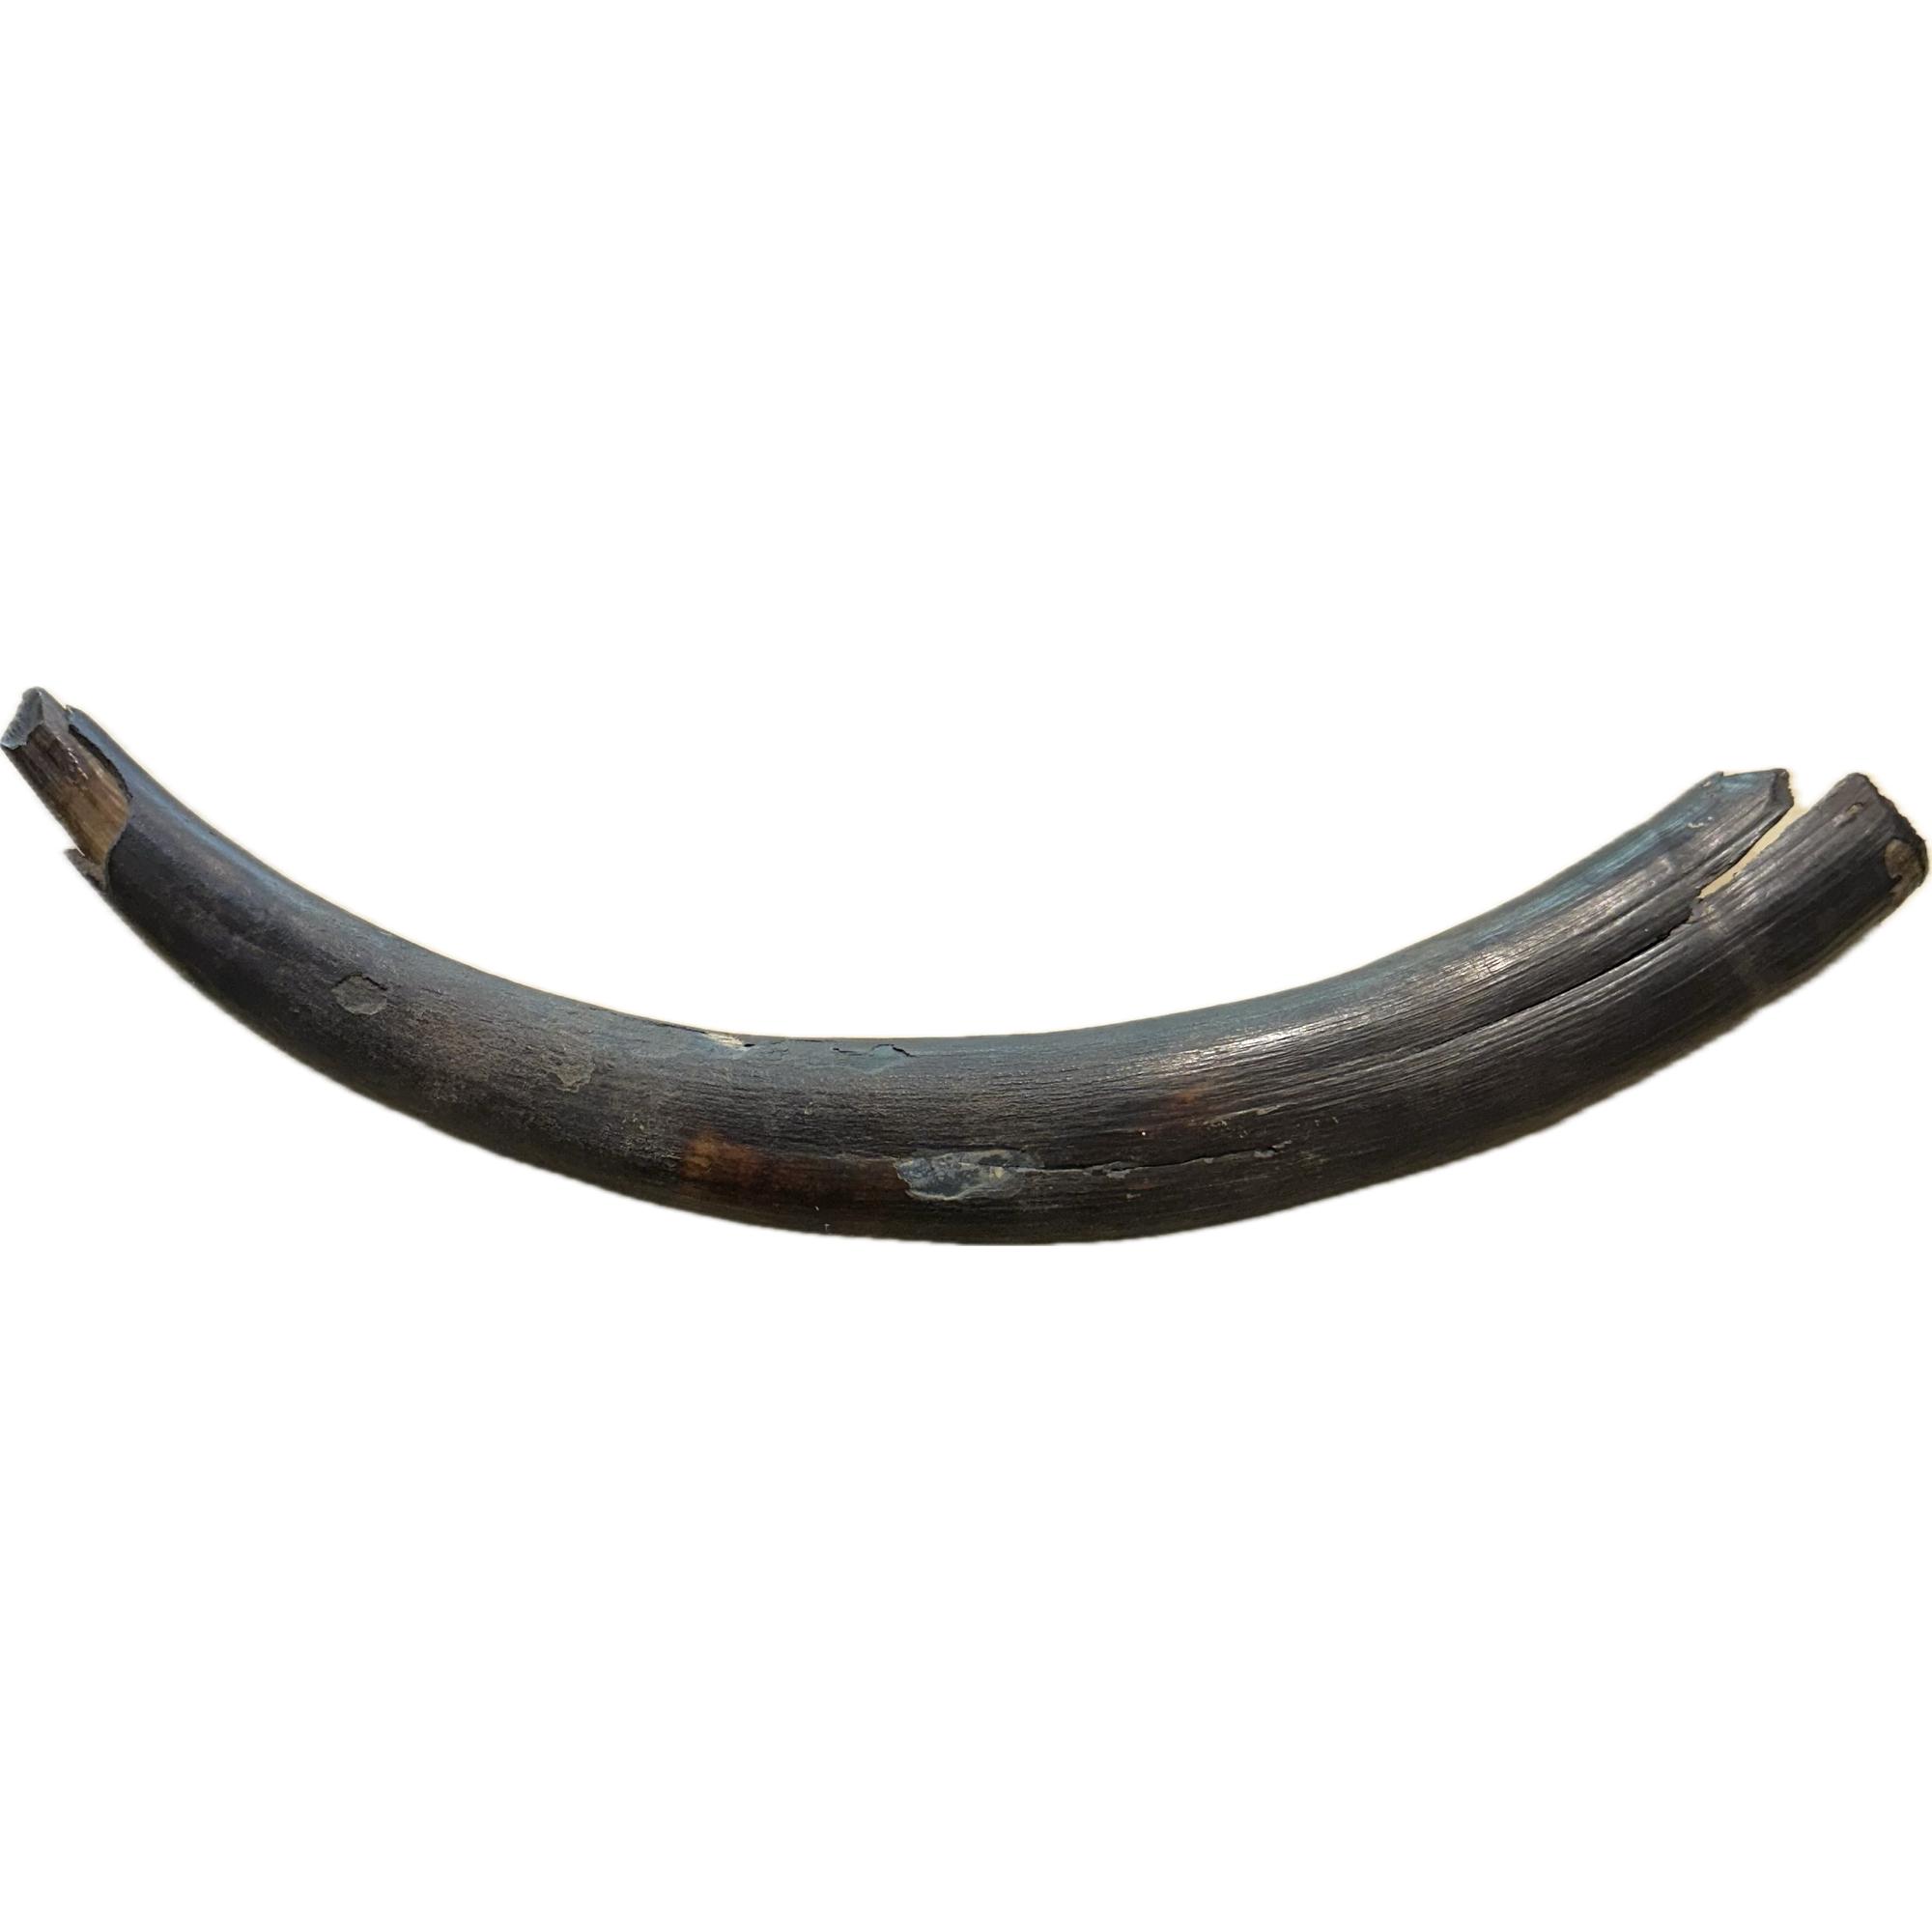 This gorgeous, woolly mammoth tusk was from a juvenile and contains the complete route and full tip. This young tusk was found in Washington state.